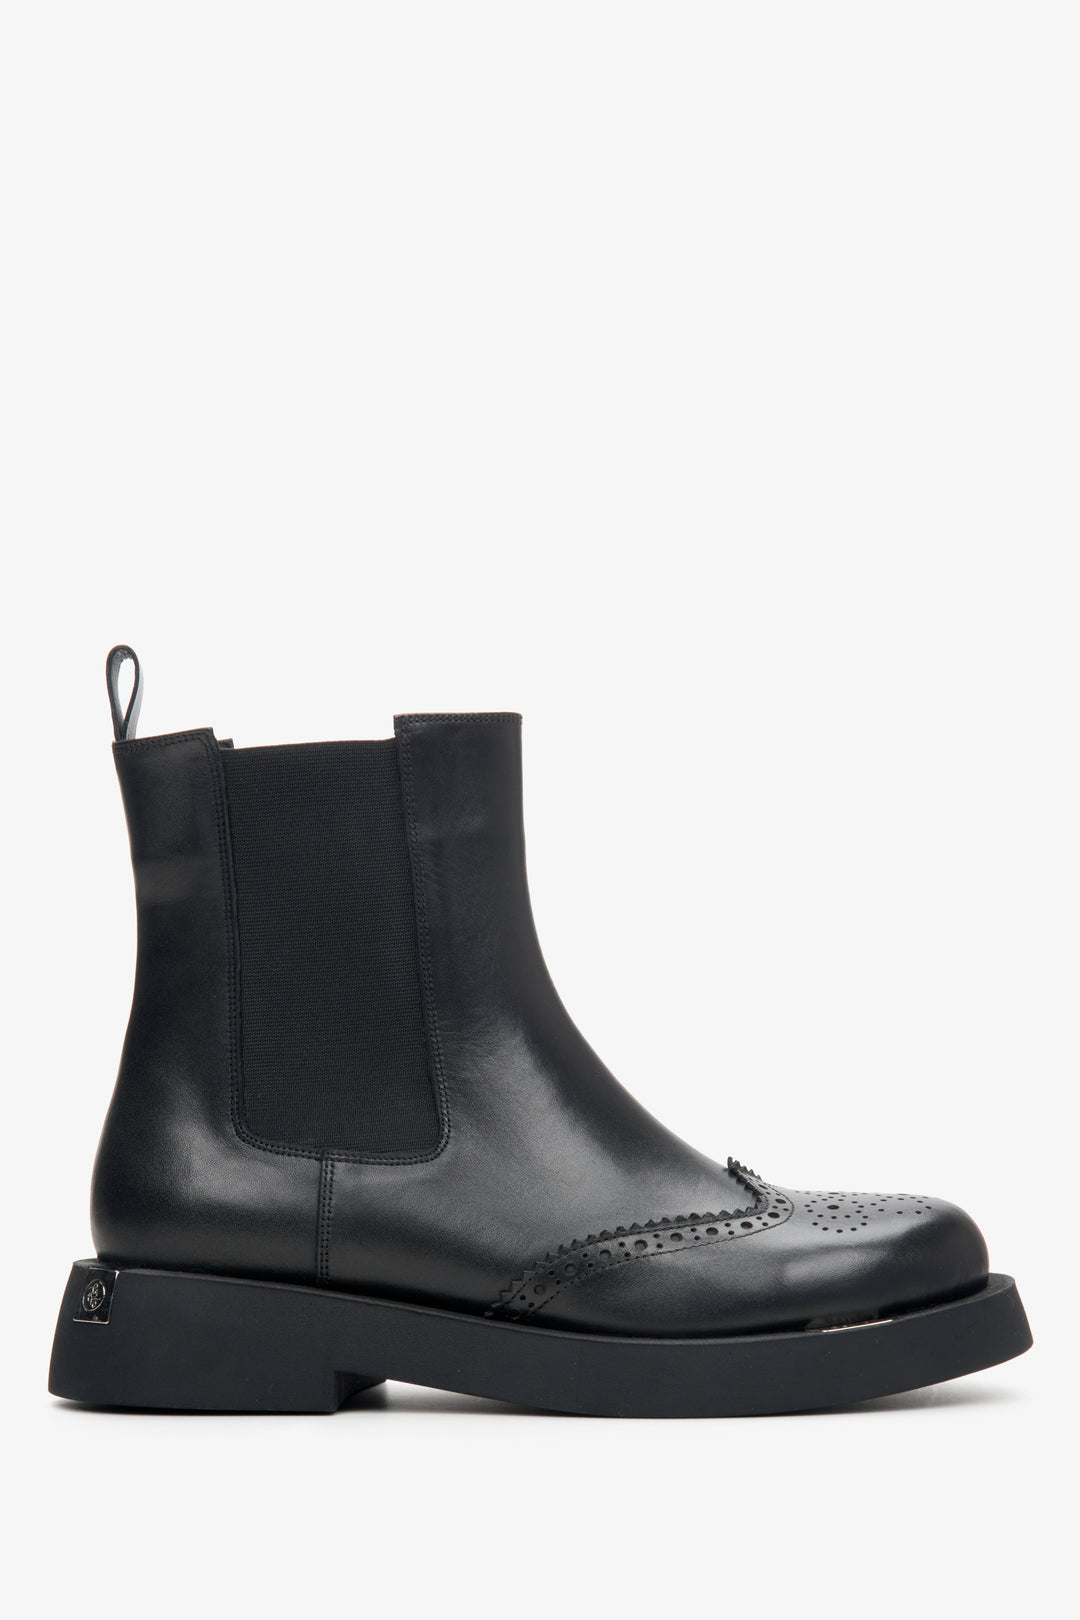 Women's Black Chelsea Boots made of Genuine Leather with Perforation Estro ER00113886.